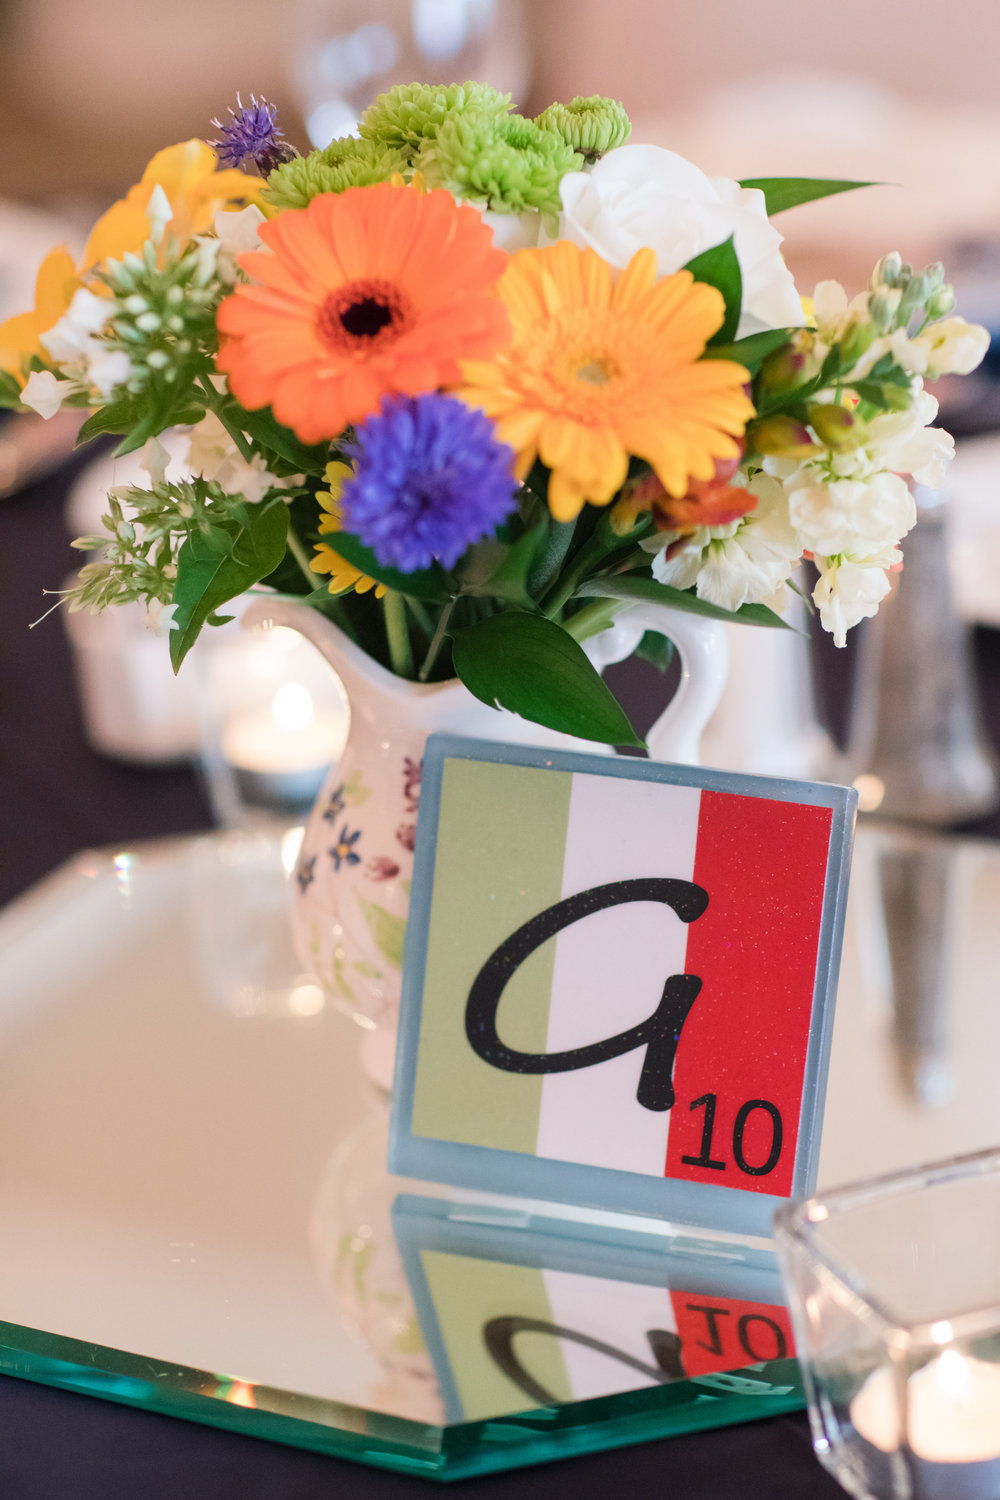 Unique Wedding Table Numbers - A Classic George Washington Hotel Wedding - Photography by Marirosa